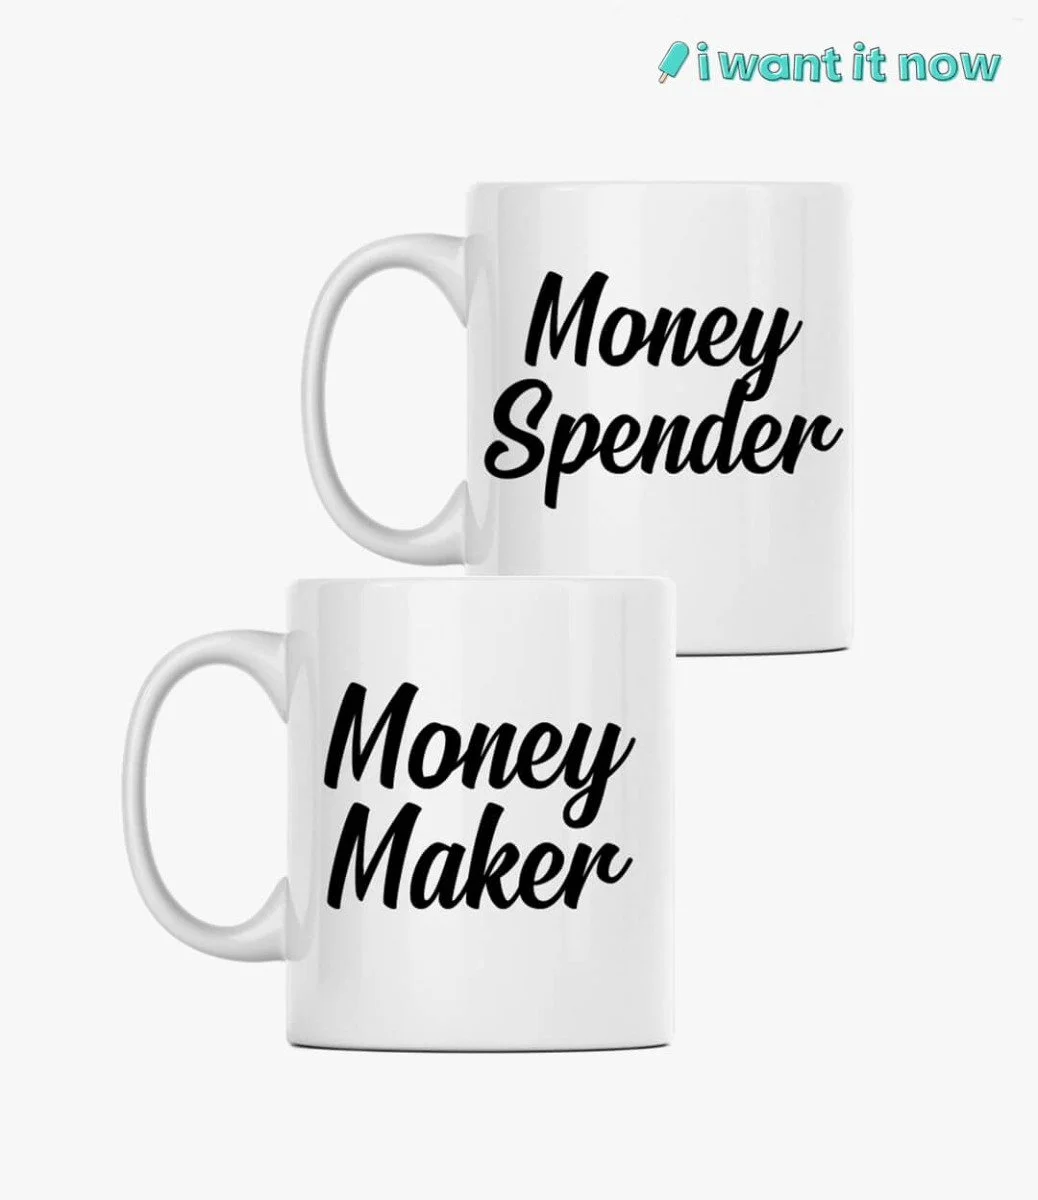 Couple Mugs - Money Spender & Money Maker By I Want It Now